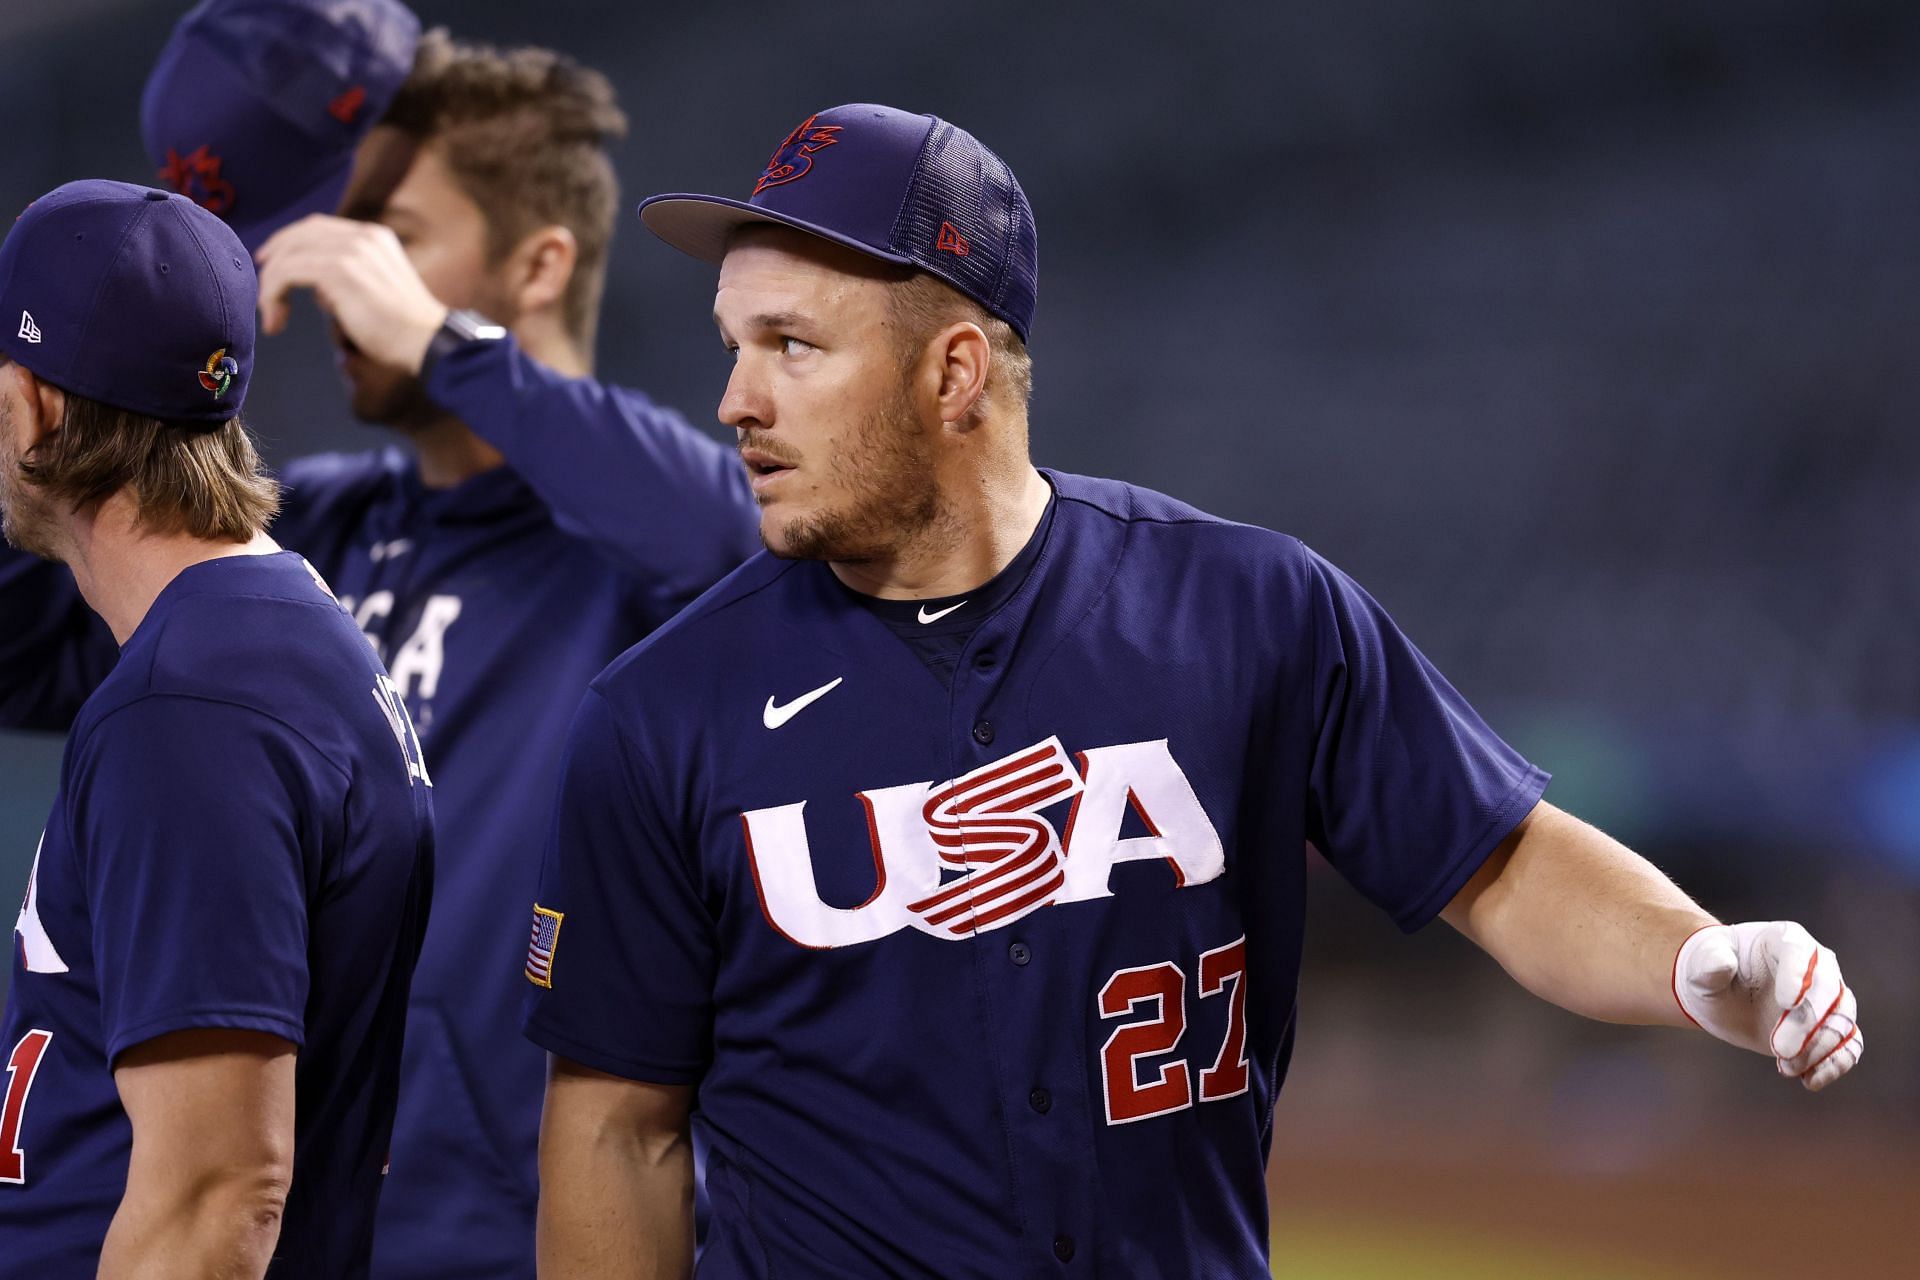 Mike Trout is enjoying baseball with Team USA, and Los Angeles